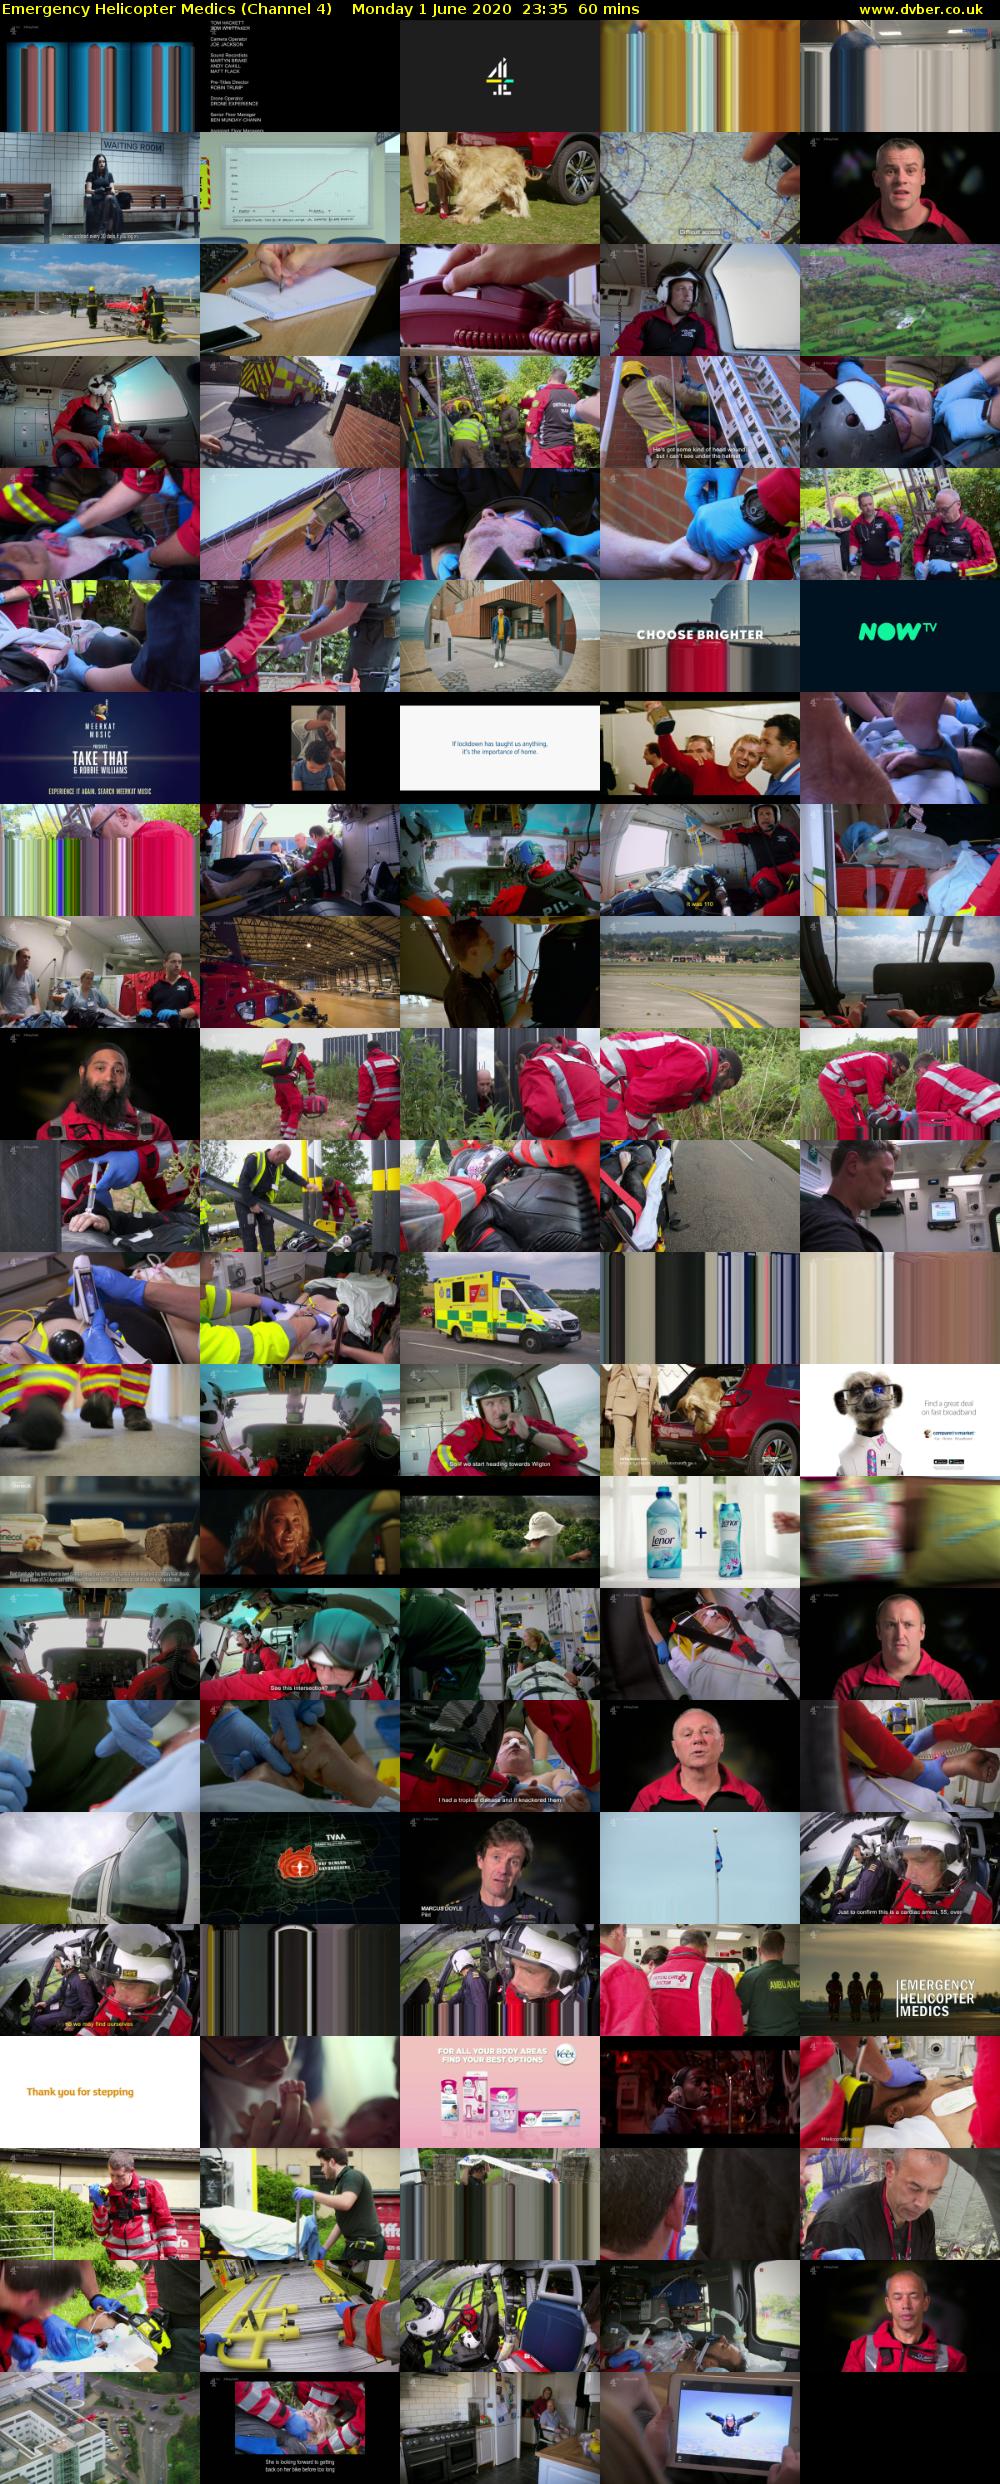 Emergency Helicopter Medics (Channel 4) Monday 1 June 2020 23:35 - 00:35